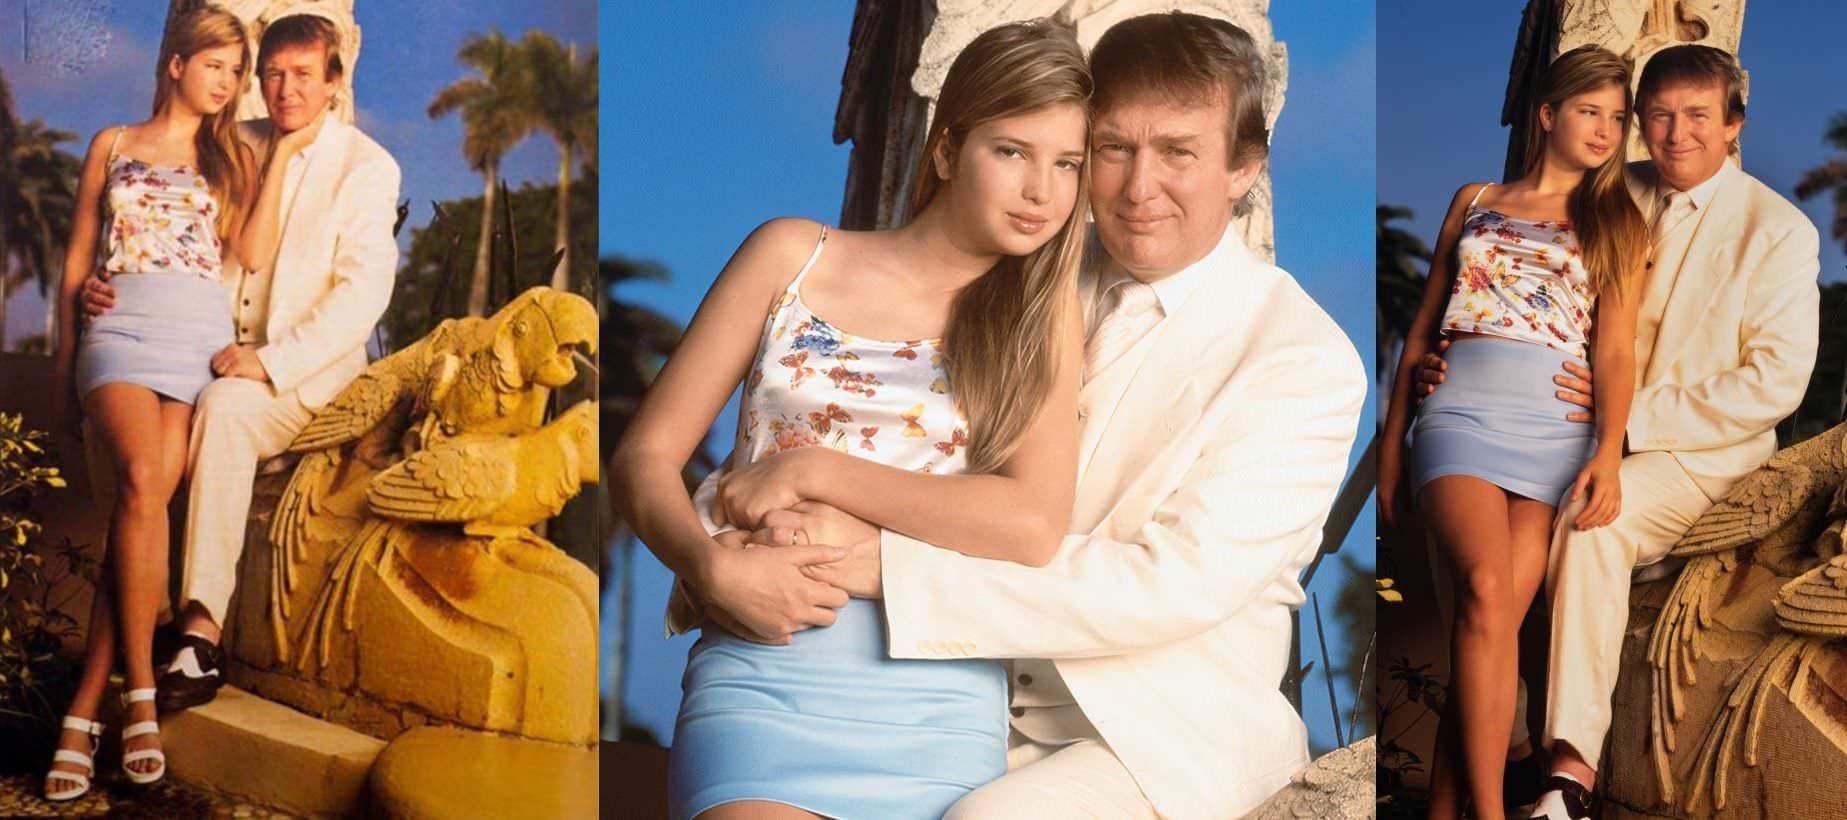 Current US President Donald Trump poses with his then 15 year old daughter Ivanka Trump for a magazine in 1996. These pictures zoom in too. (Somewhat more recent than the rest but definitely thought it fit this series).